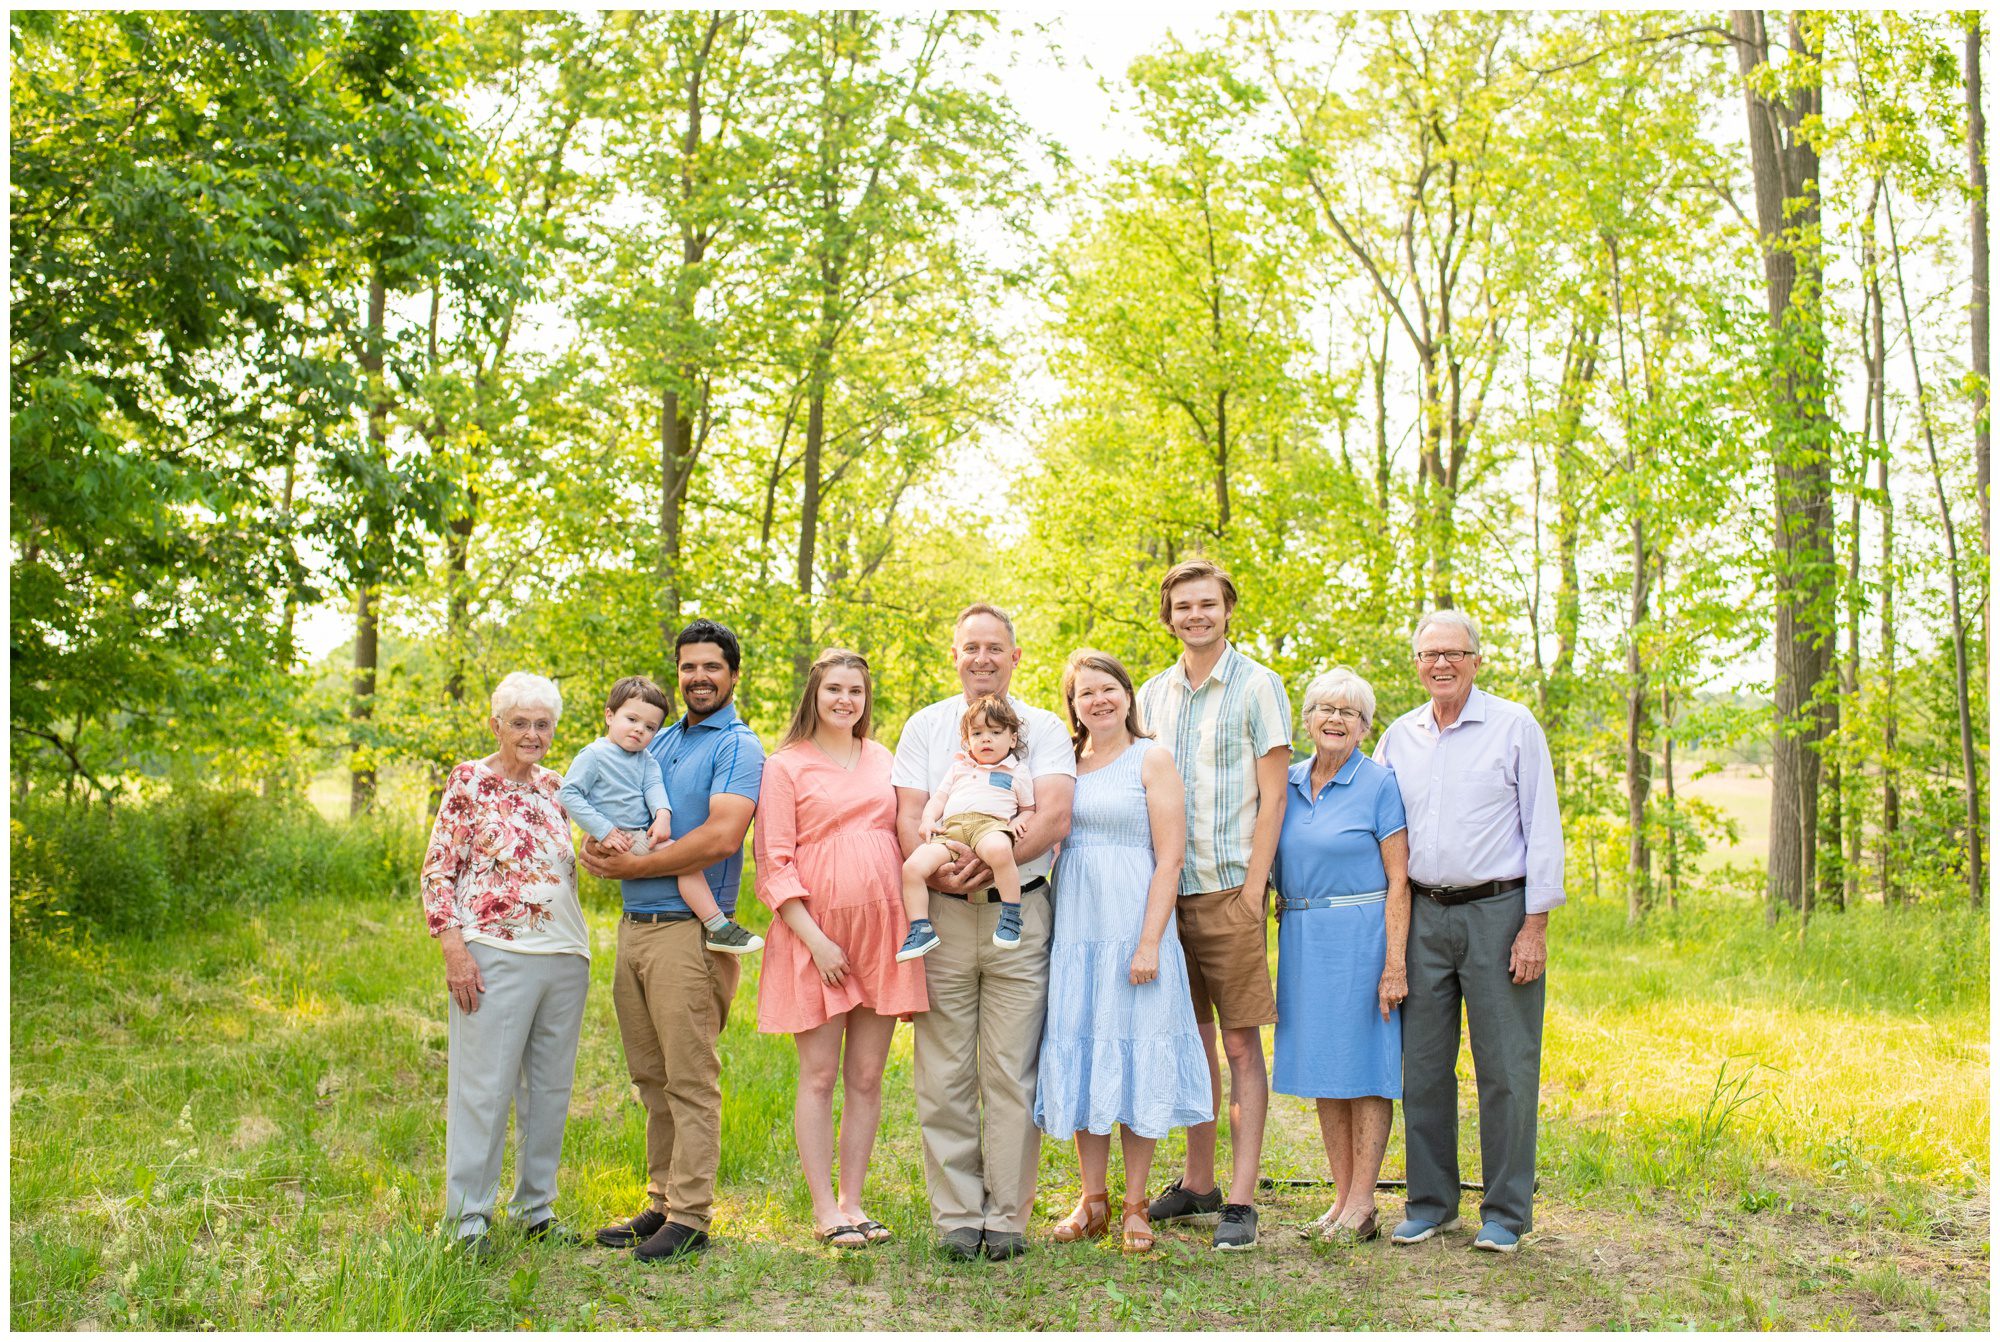 Family standing together on tree lined path